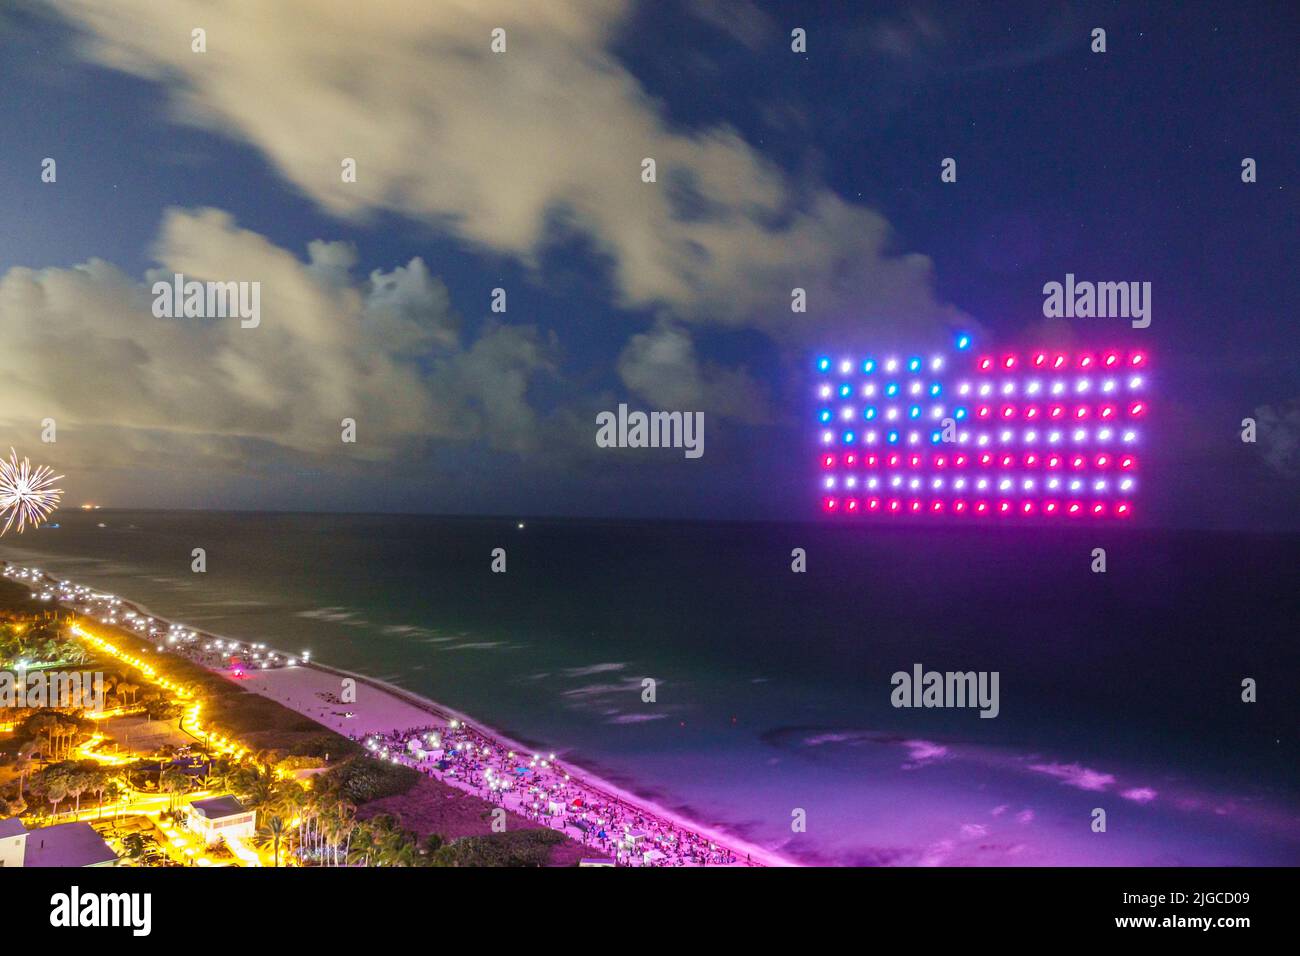 Miami Beach Florida,Ocean Terrace Fire on the Fourth 4th of July Festival event celebration,drone light show drones forming US flag,aerial overhead vi Stock Photo